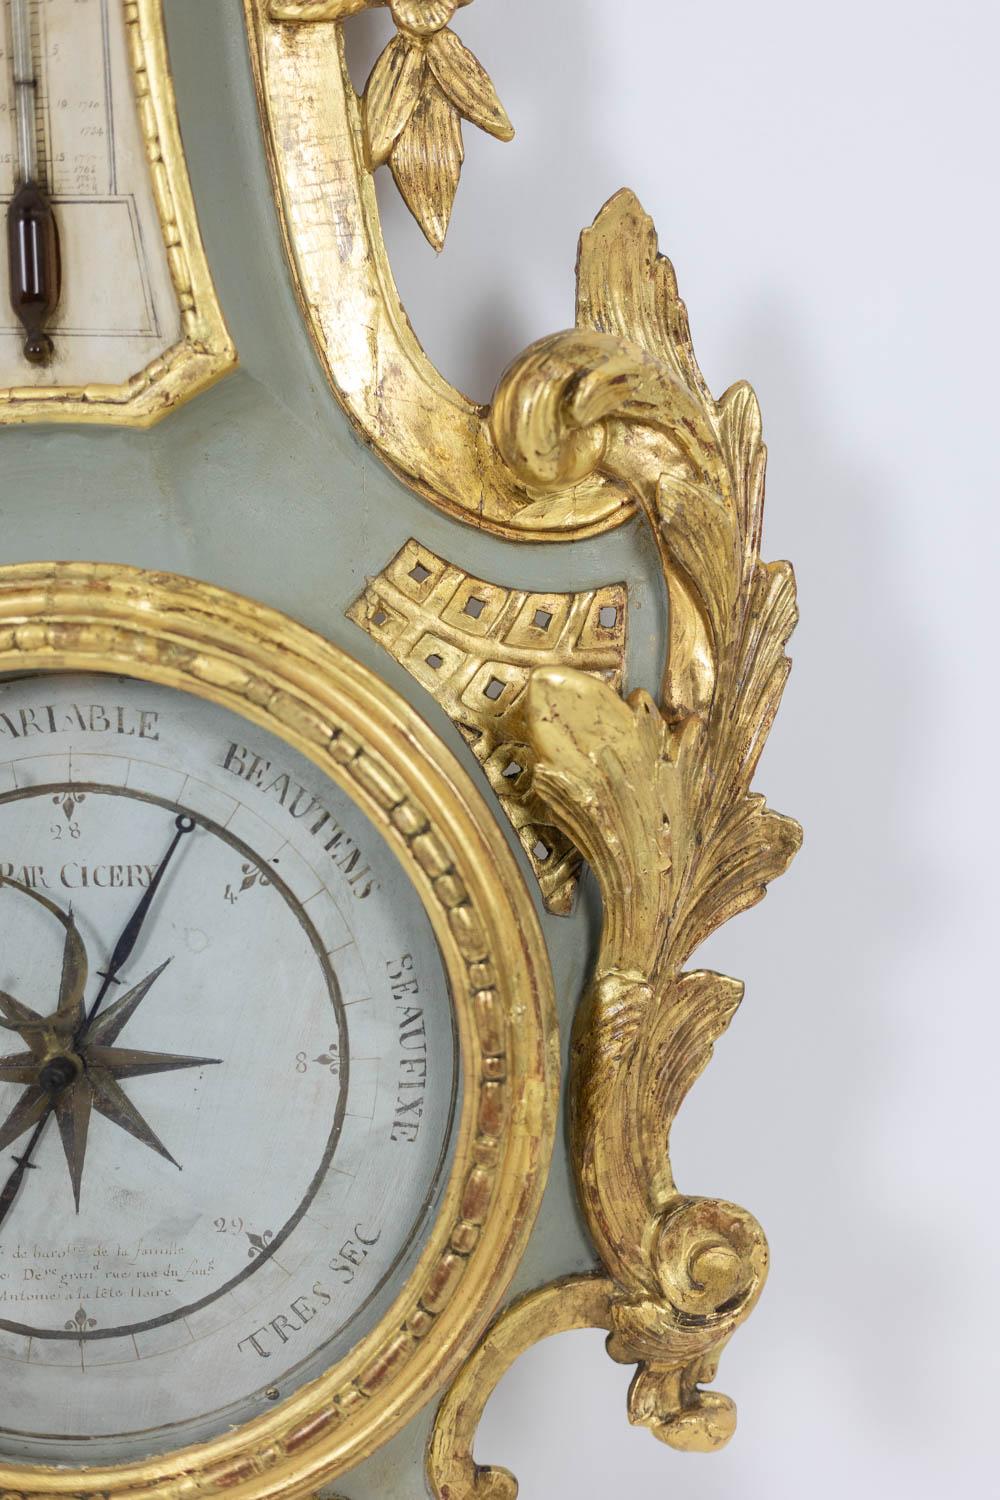 18th Century Cicery. Barometer in carved and gilded wood. 18th century period. For Sale